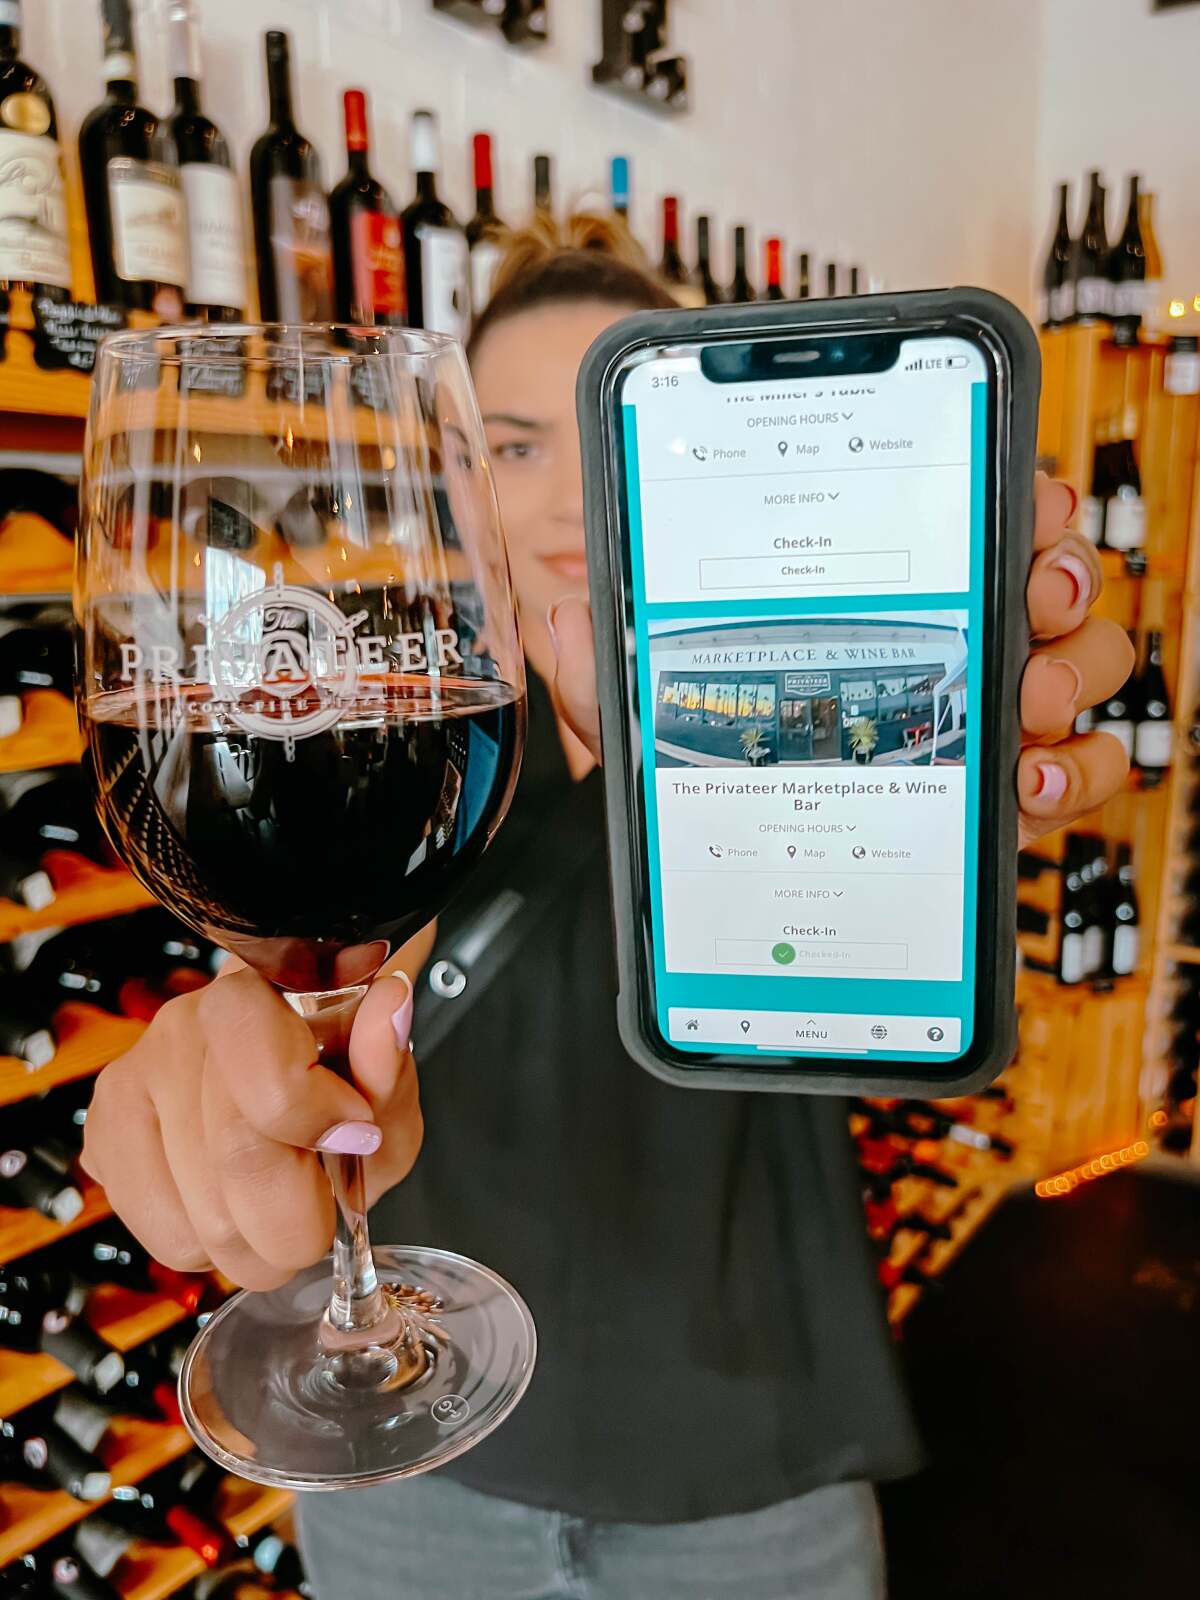 The Privateer Marketplace & Wine Bar is featured on the new O'side Sips cellphone app.